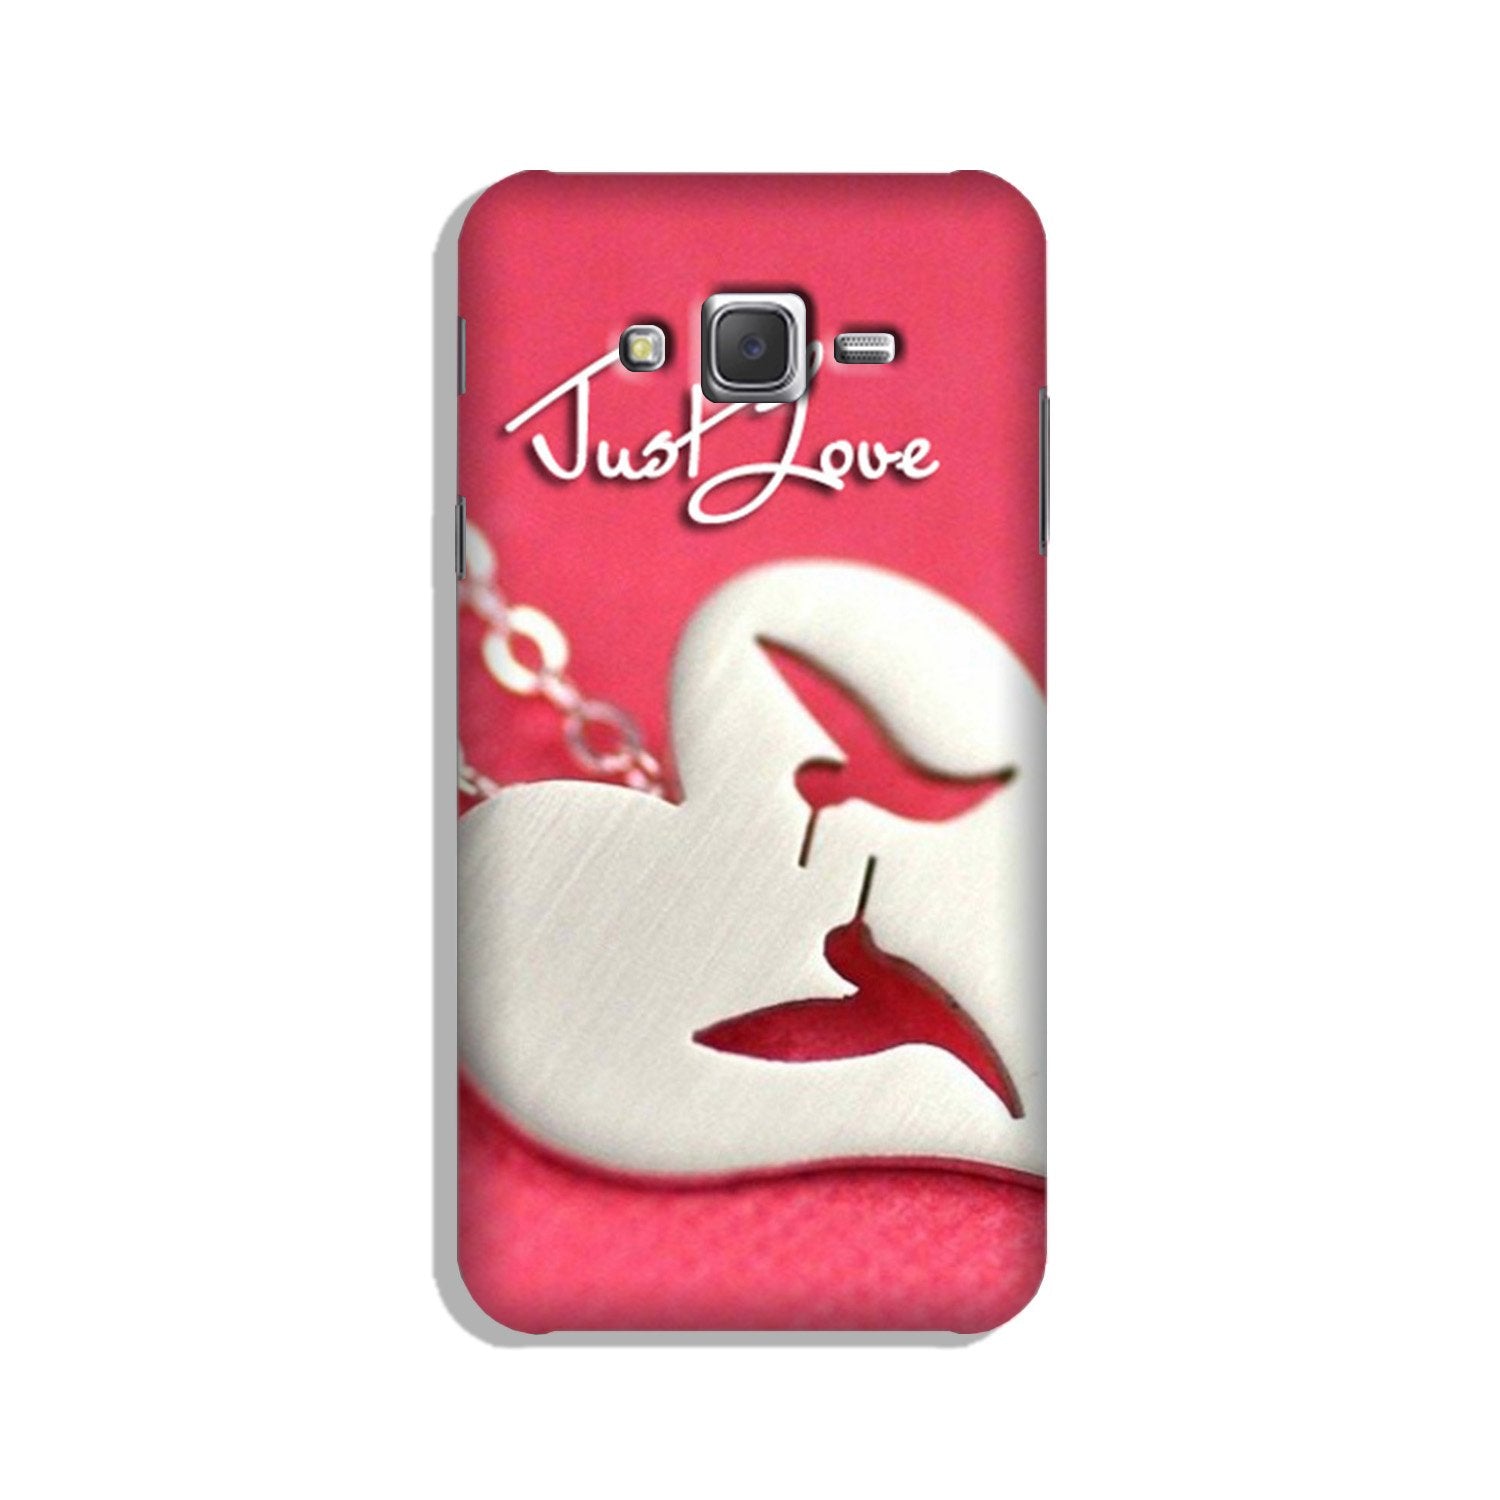 Just love Case for Galaxy J5 (2015)